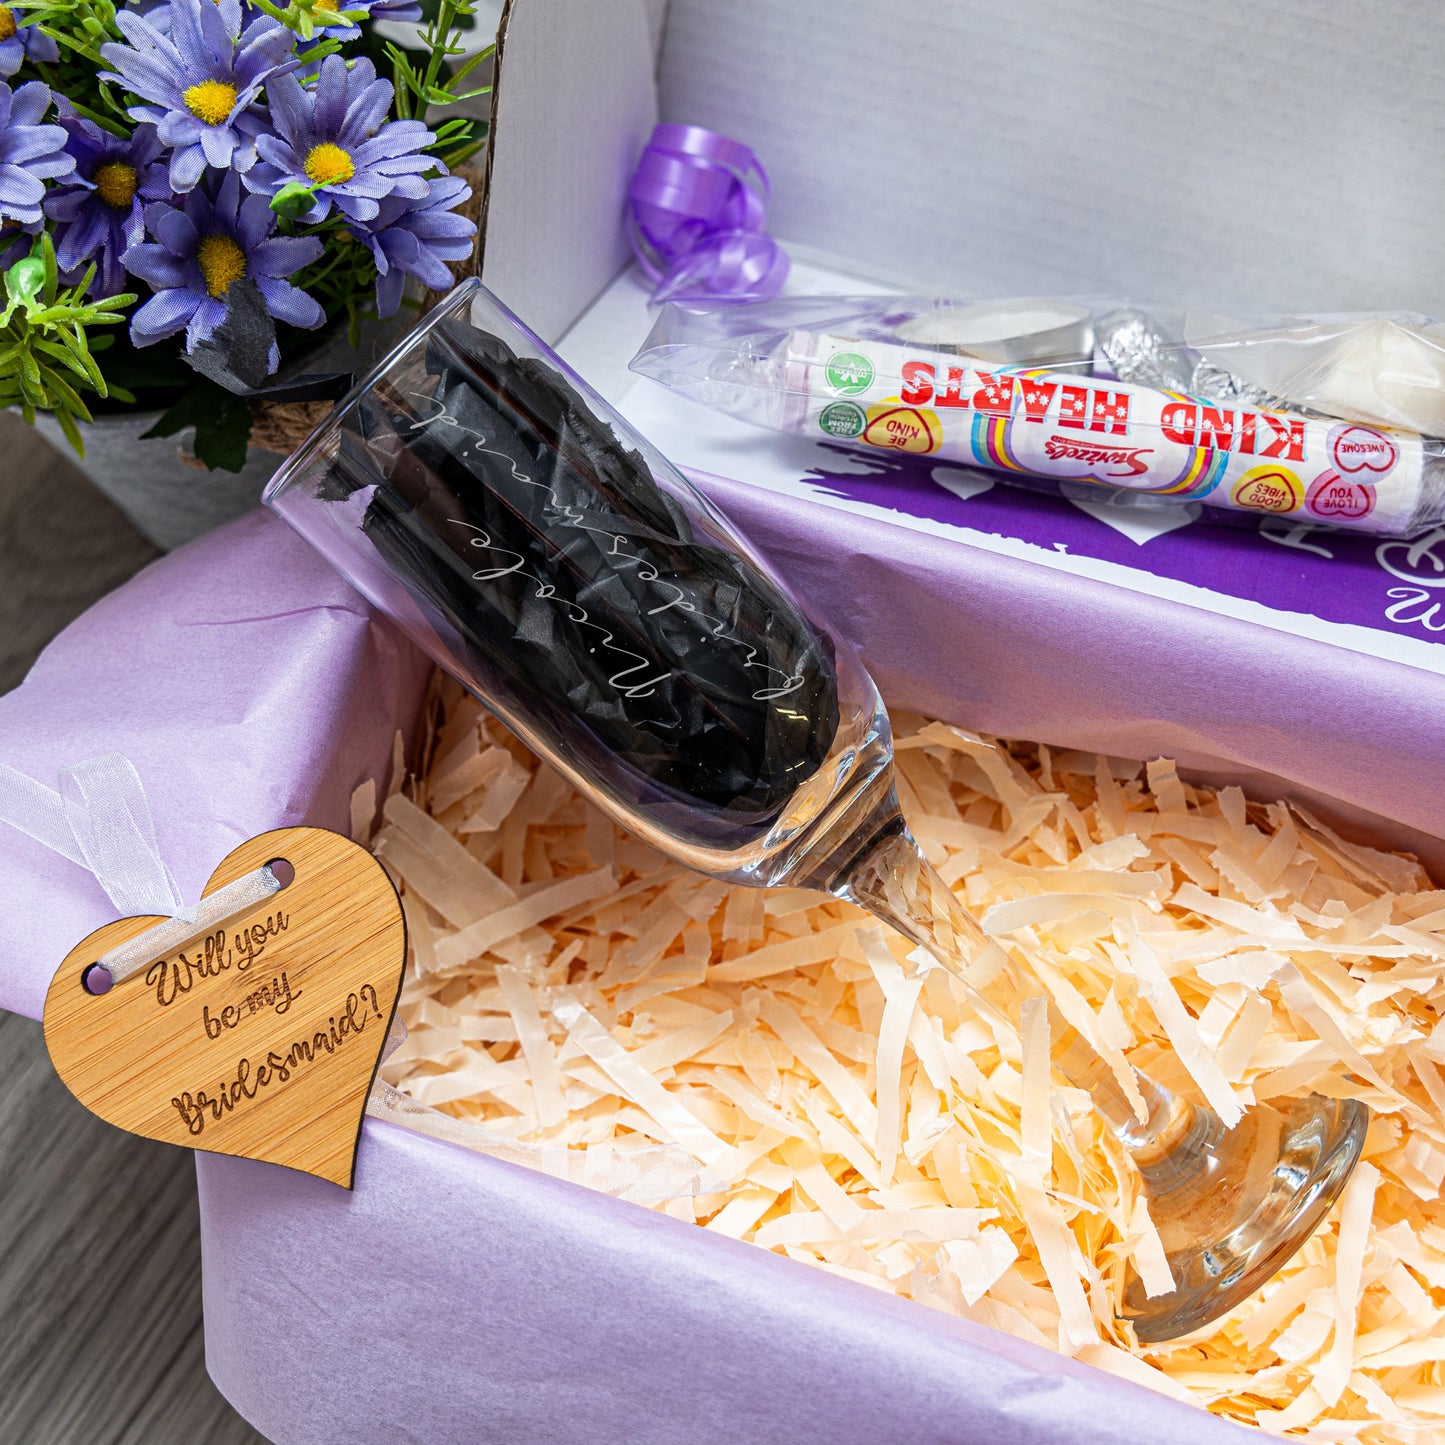 Bridesmaid Proposal Giftbox with Engraved Champagne Glass  - Always Looking Good -   